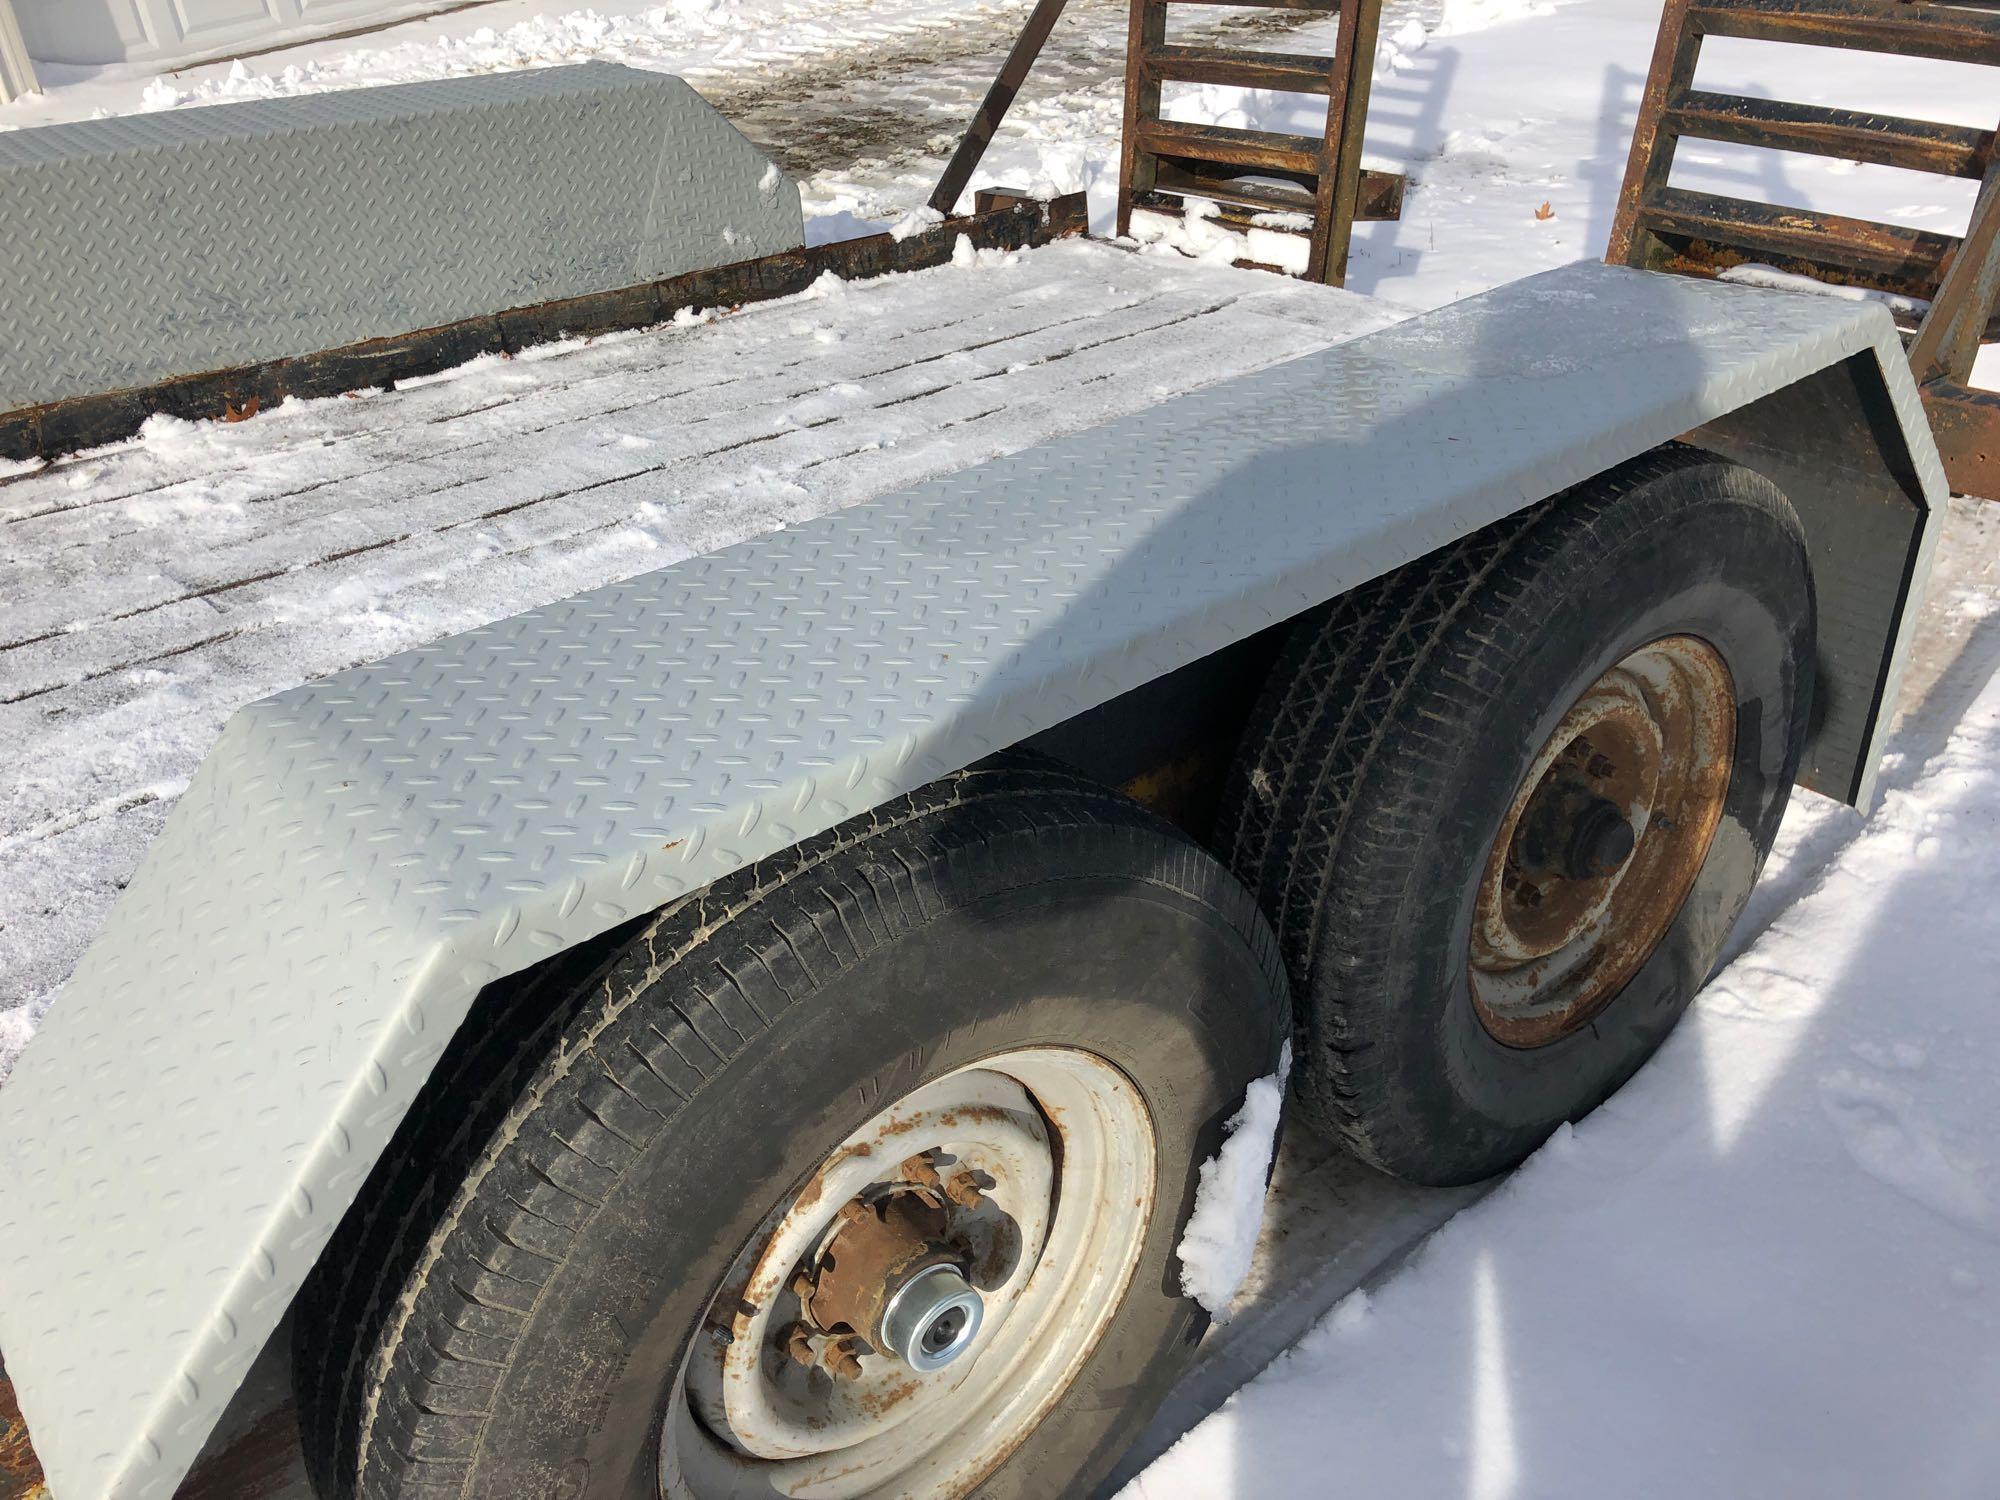 14 ft x 75 in bumper hitch trailer, wood floor, metal ramps, pintle hitch, untitled